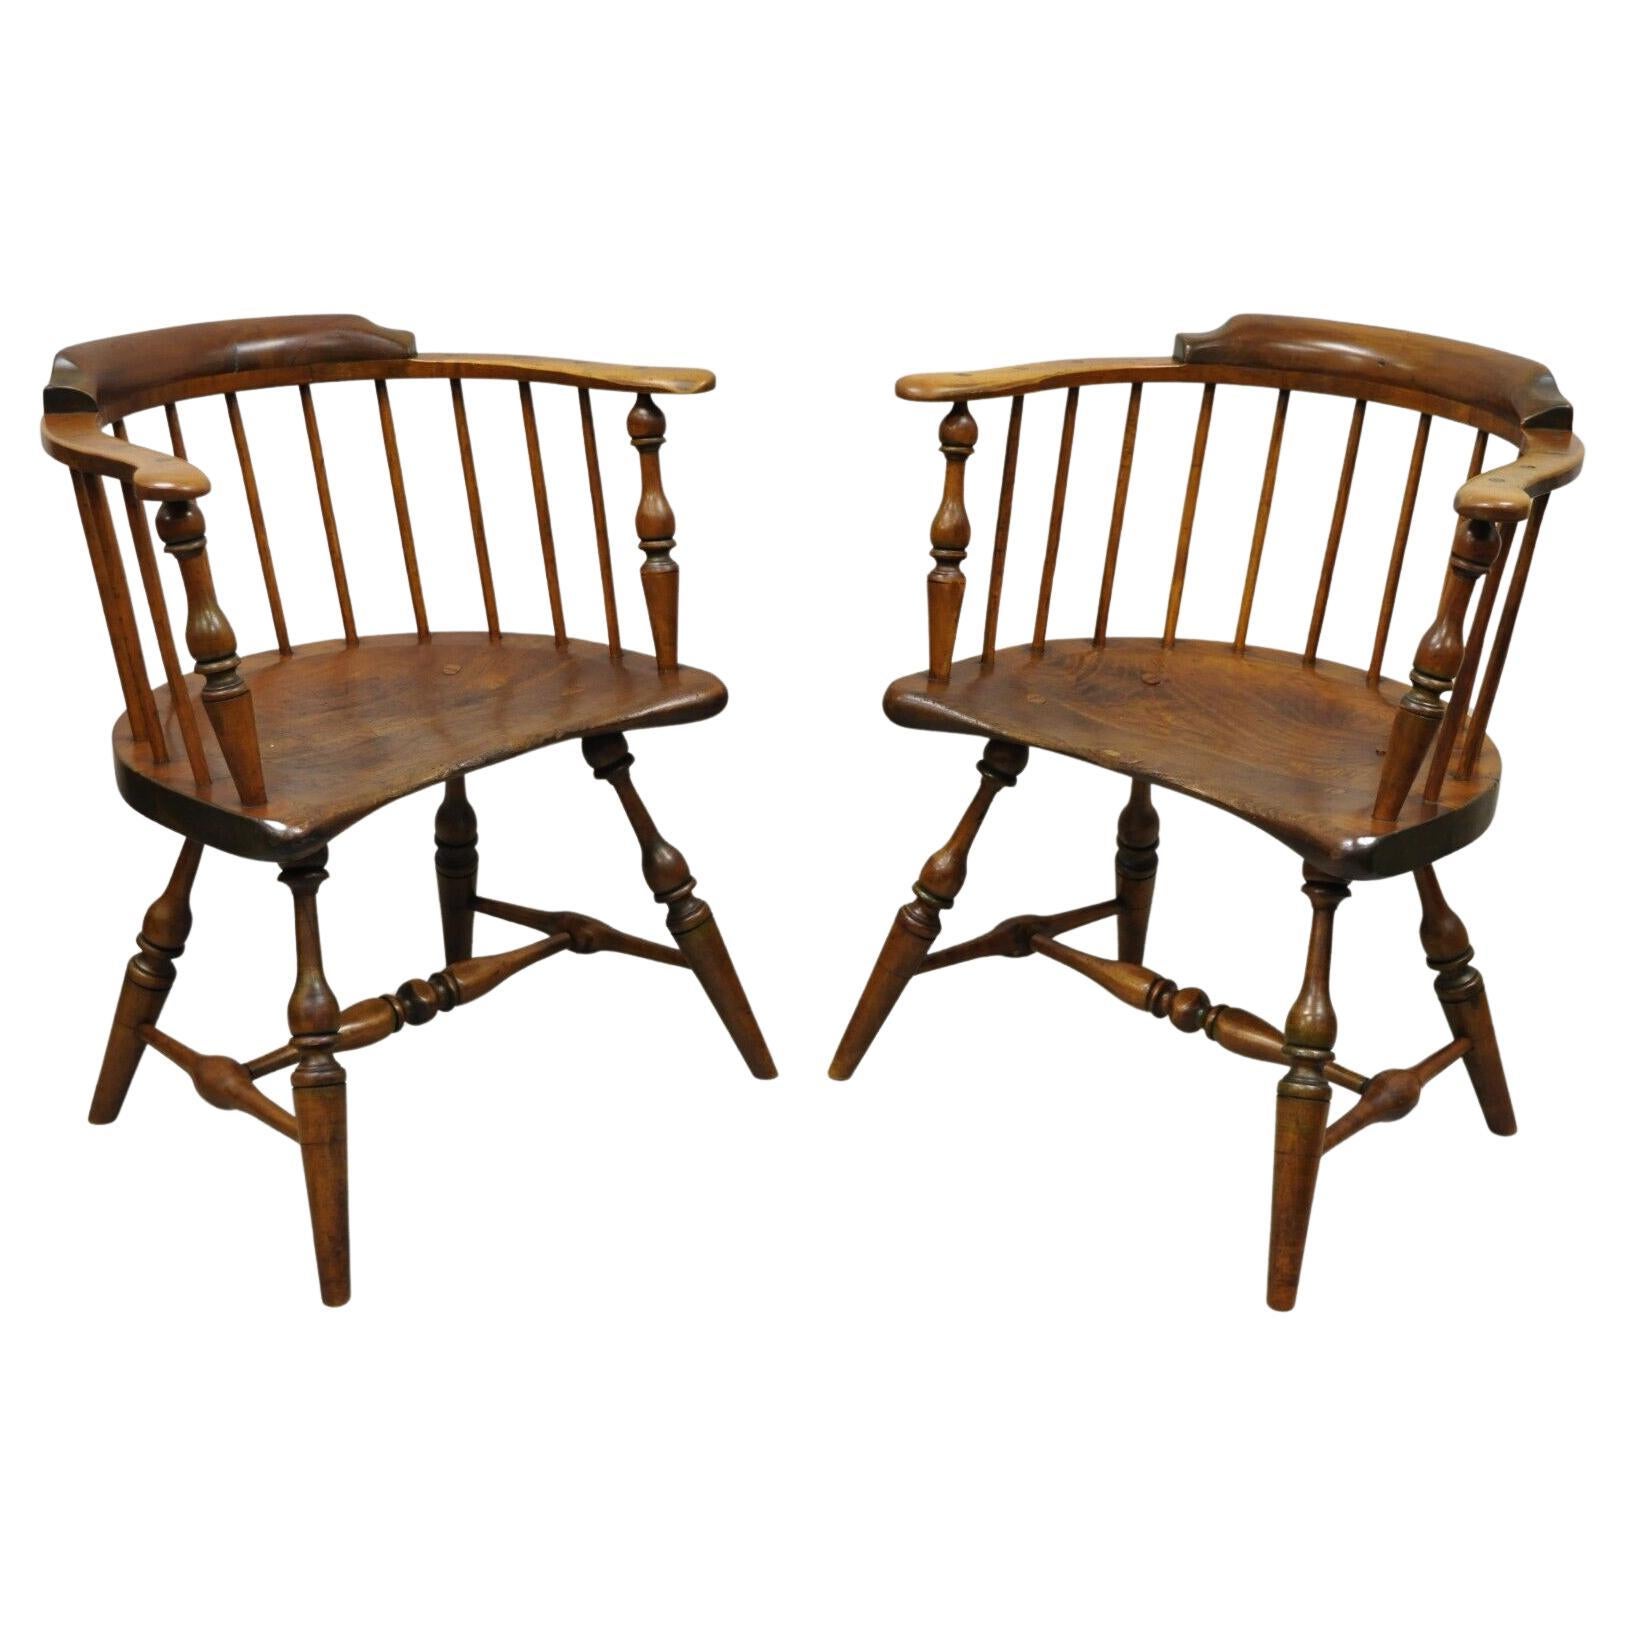 Antique Windsor Colonial Style Pine Wood Spindle Pub Arm Chairs, Pair